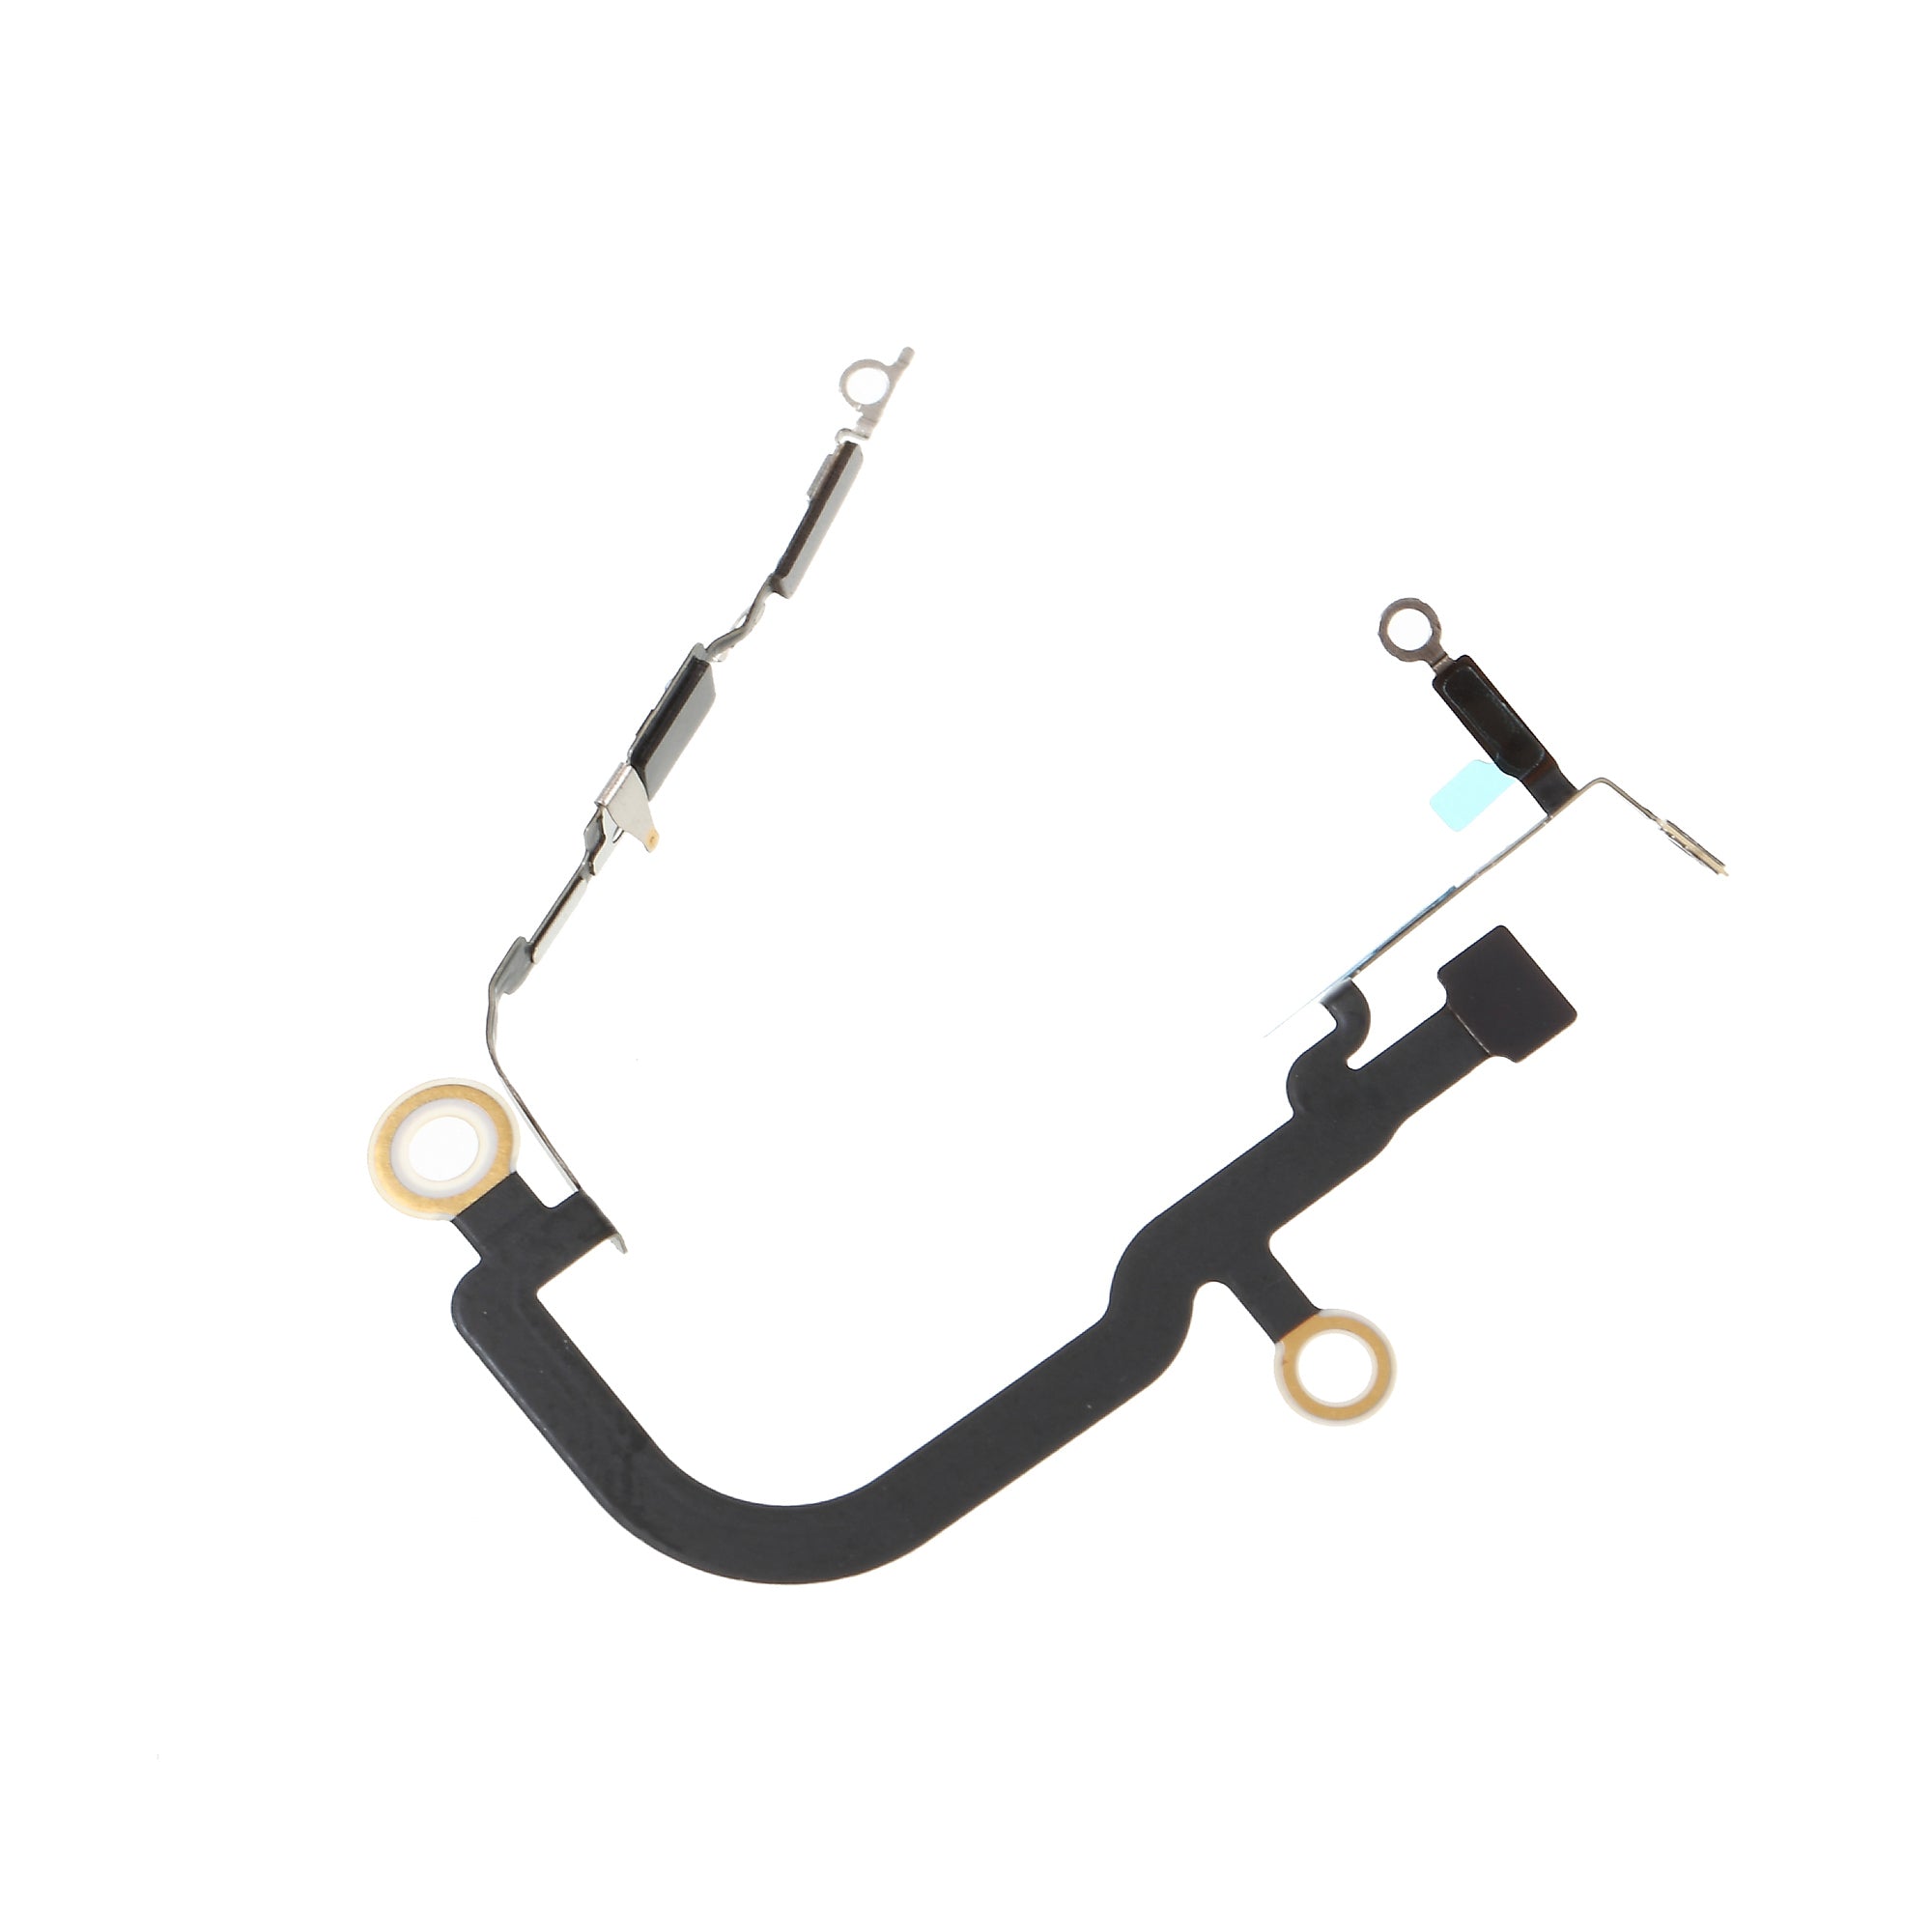 OEM Bluetooth Antenna Flex Cable for iPhone XS 5.8 inch